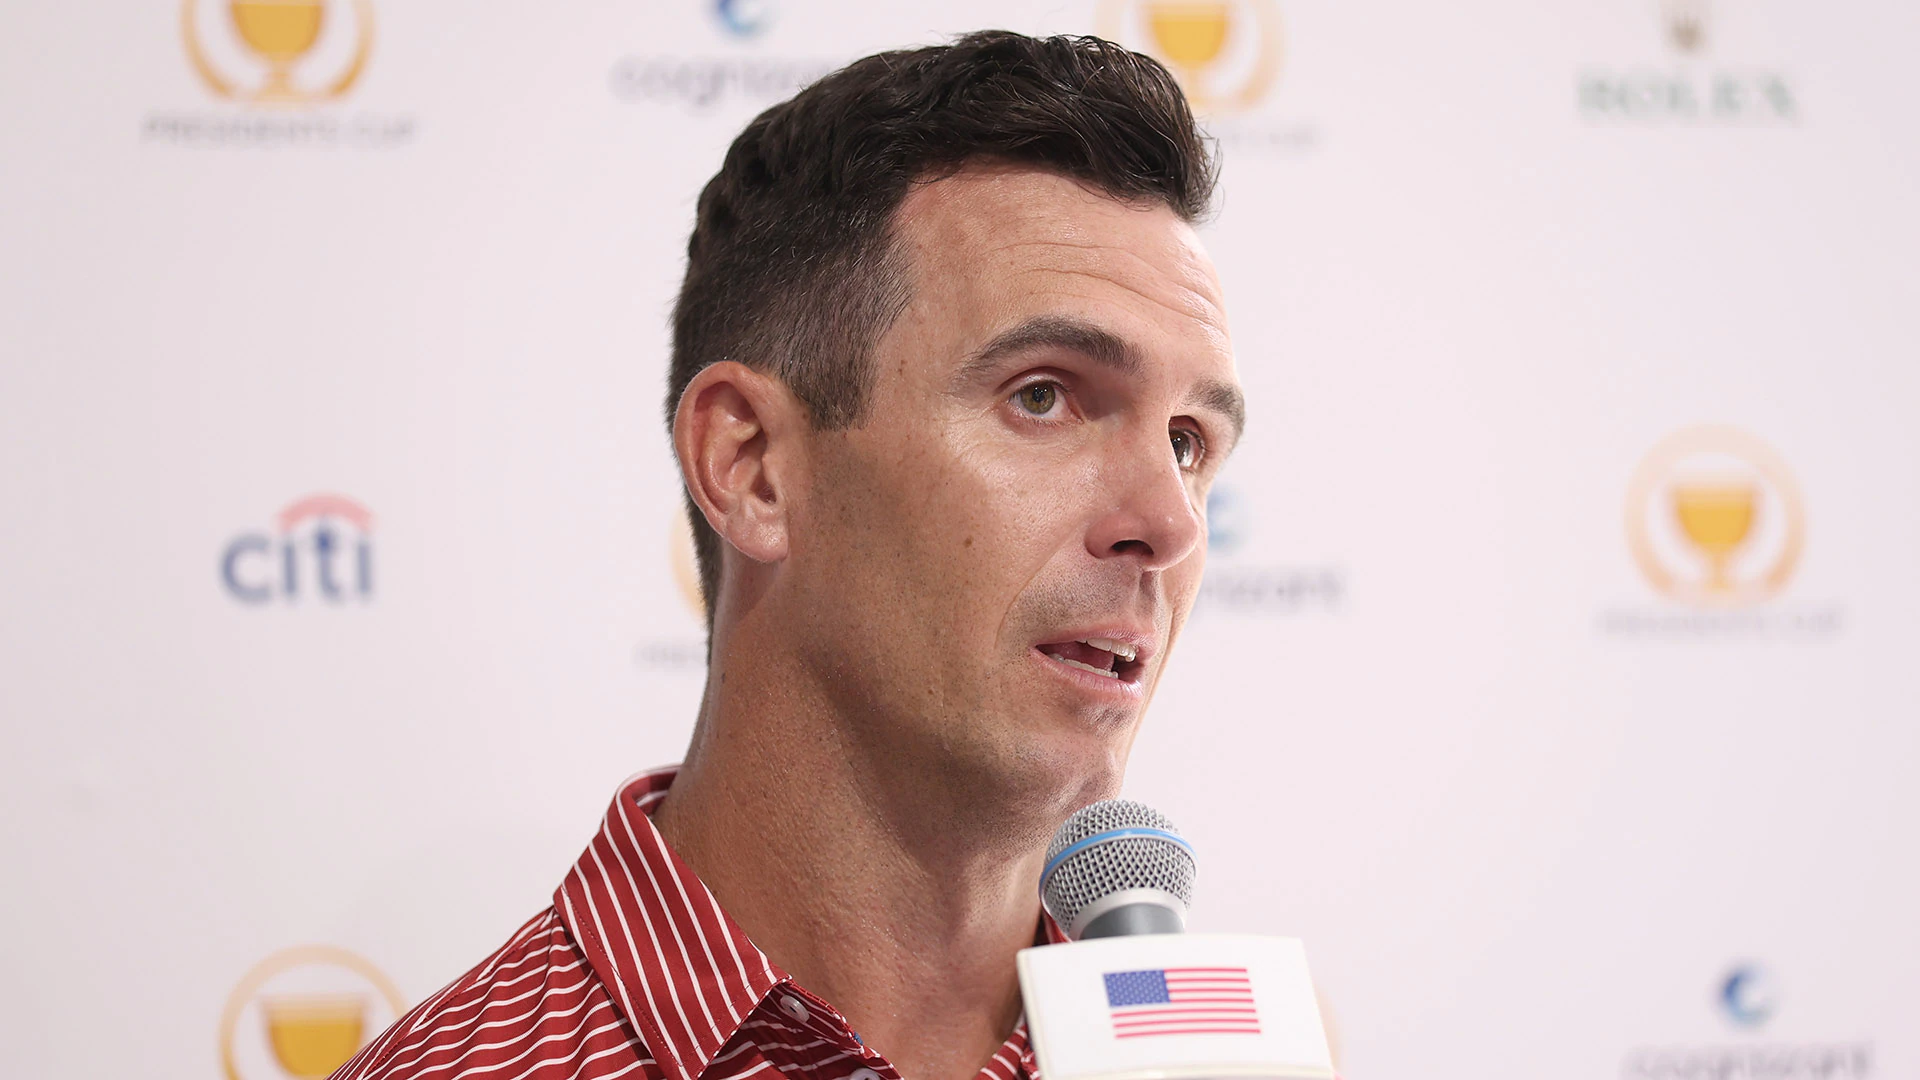 Presidents Cup 2022: Finally on U.S. team, Billy Horschel says haters ‘don’t know what the ‘F’ they’re talking about’